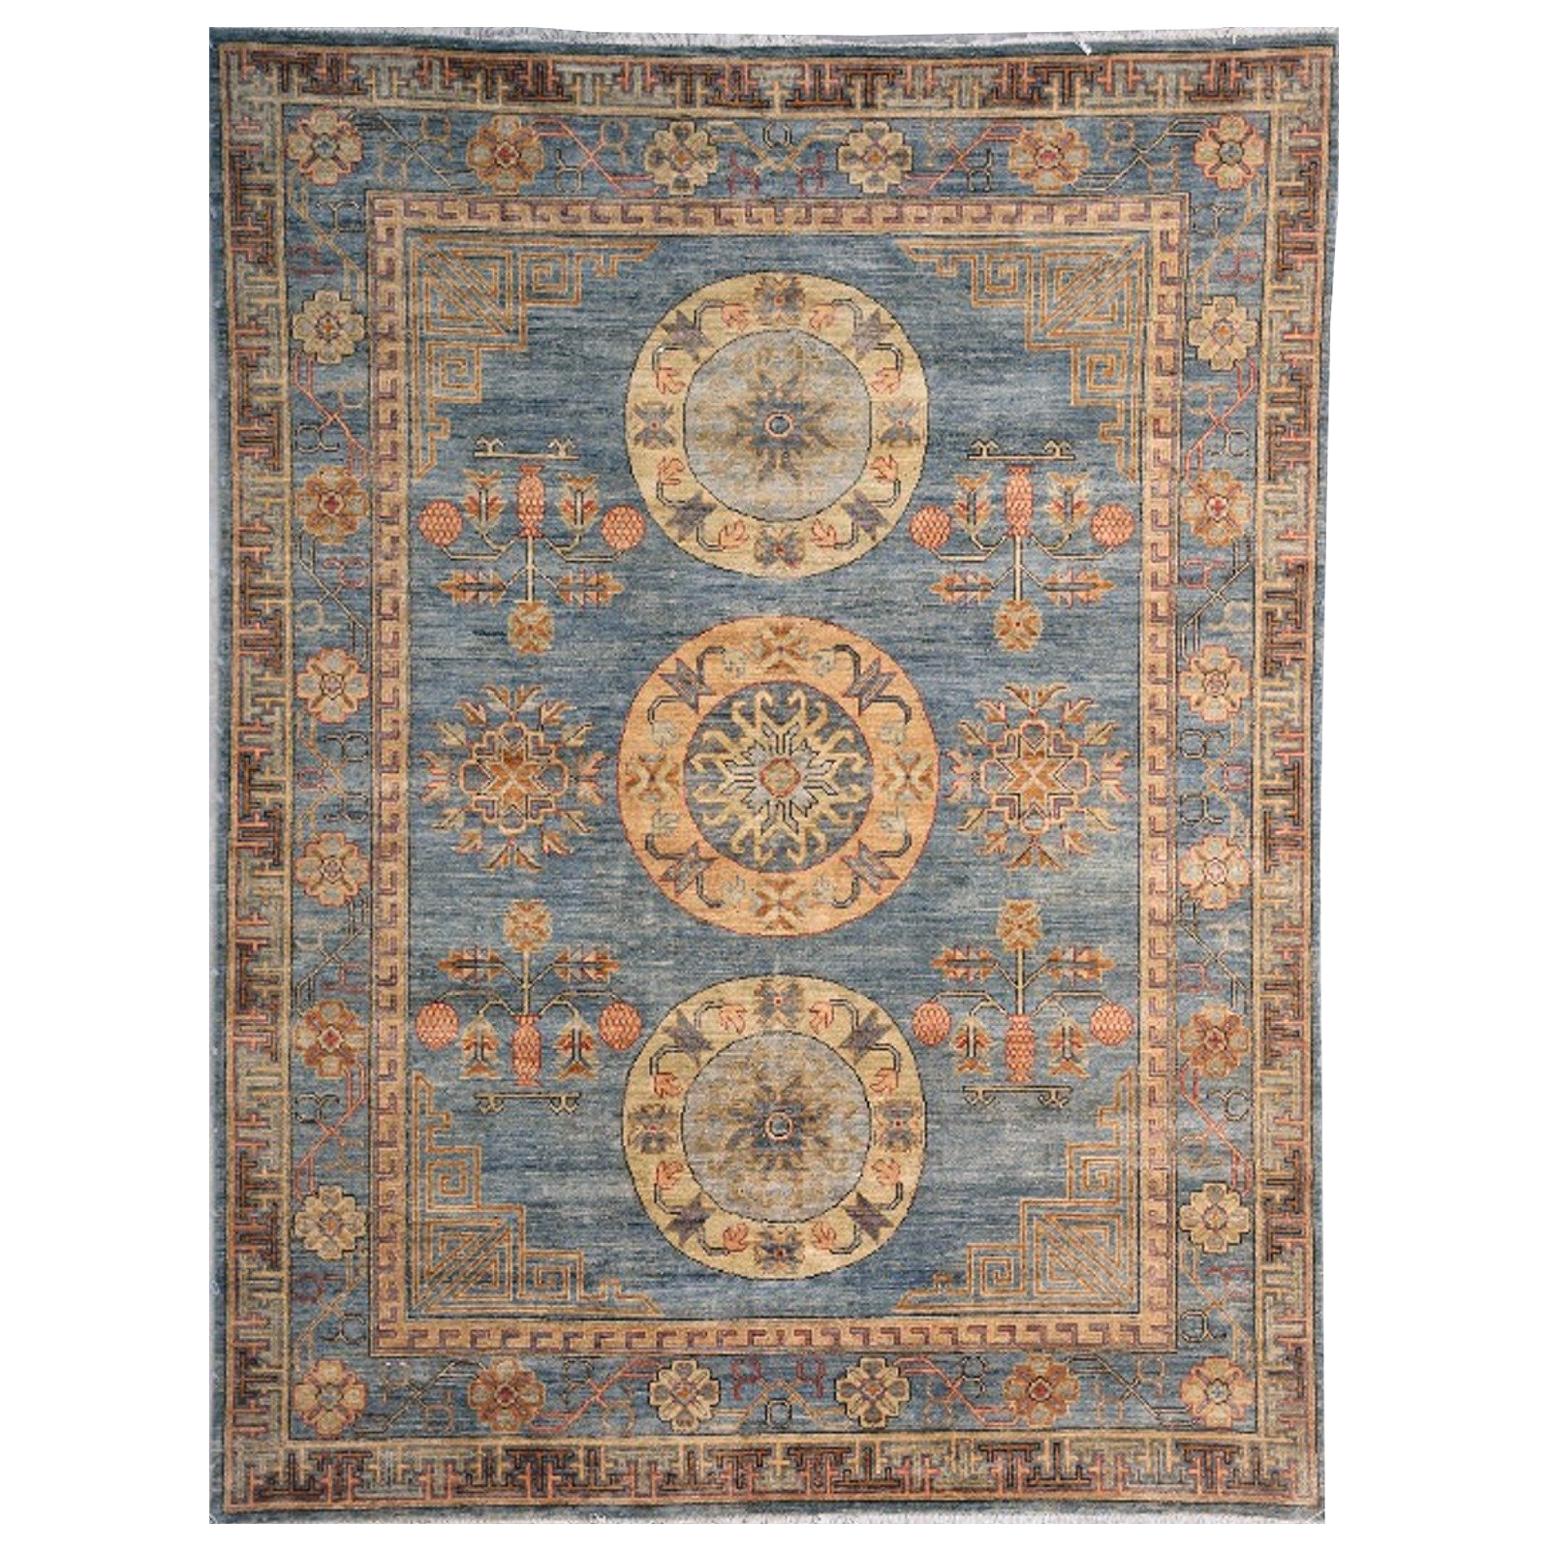 Khotan Style Rug Hand Knotted Blue Beige Copper Contemporary Wool Area Carpet